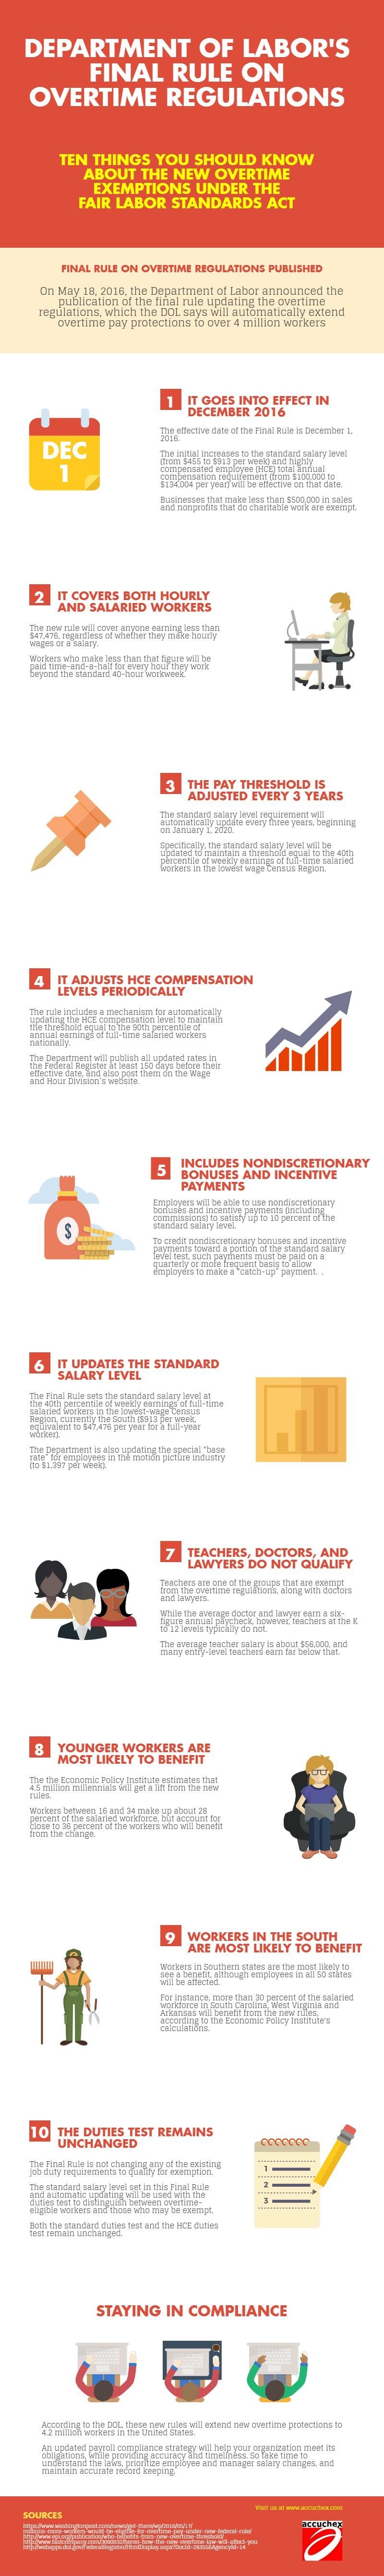 labor-law-update-overtime-exemption-infographic